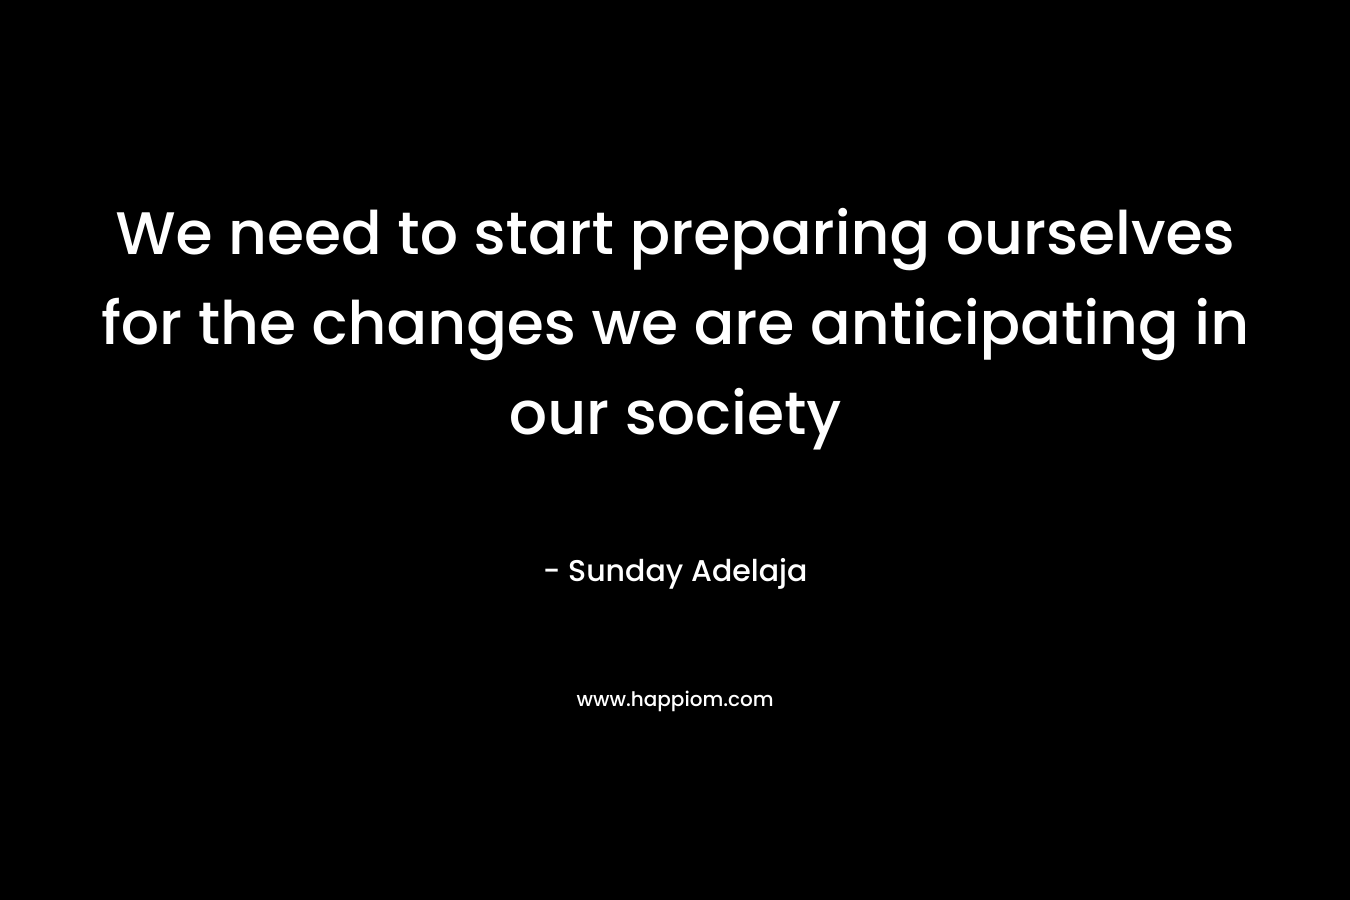 We need to start preparing ourselves for the changes we are anticipating in our society